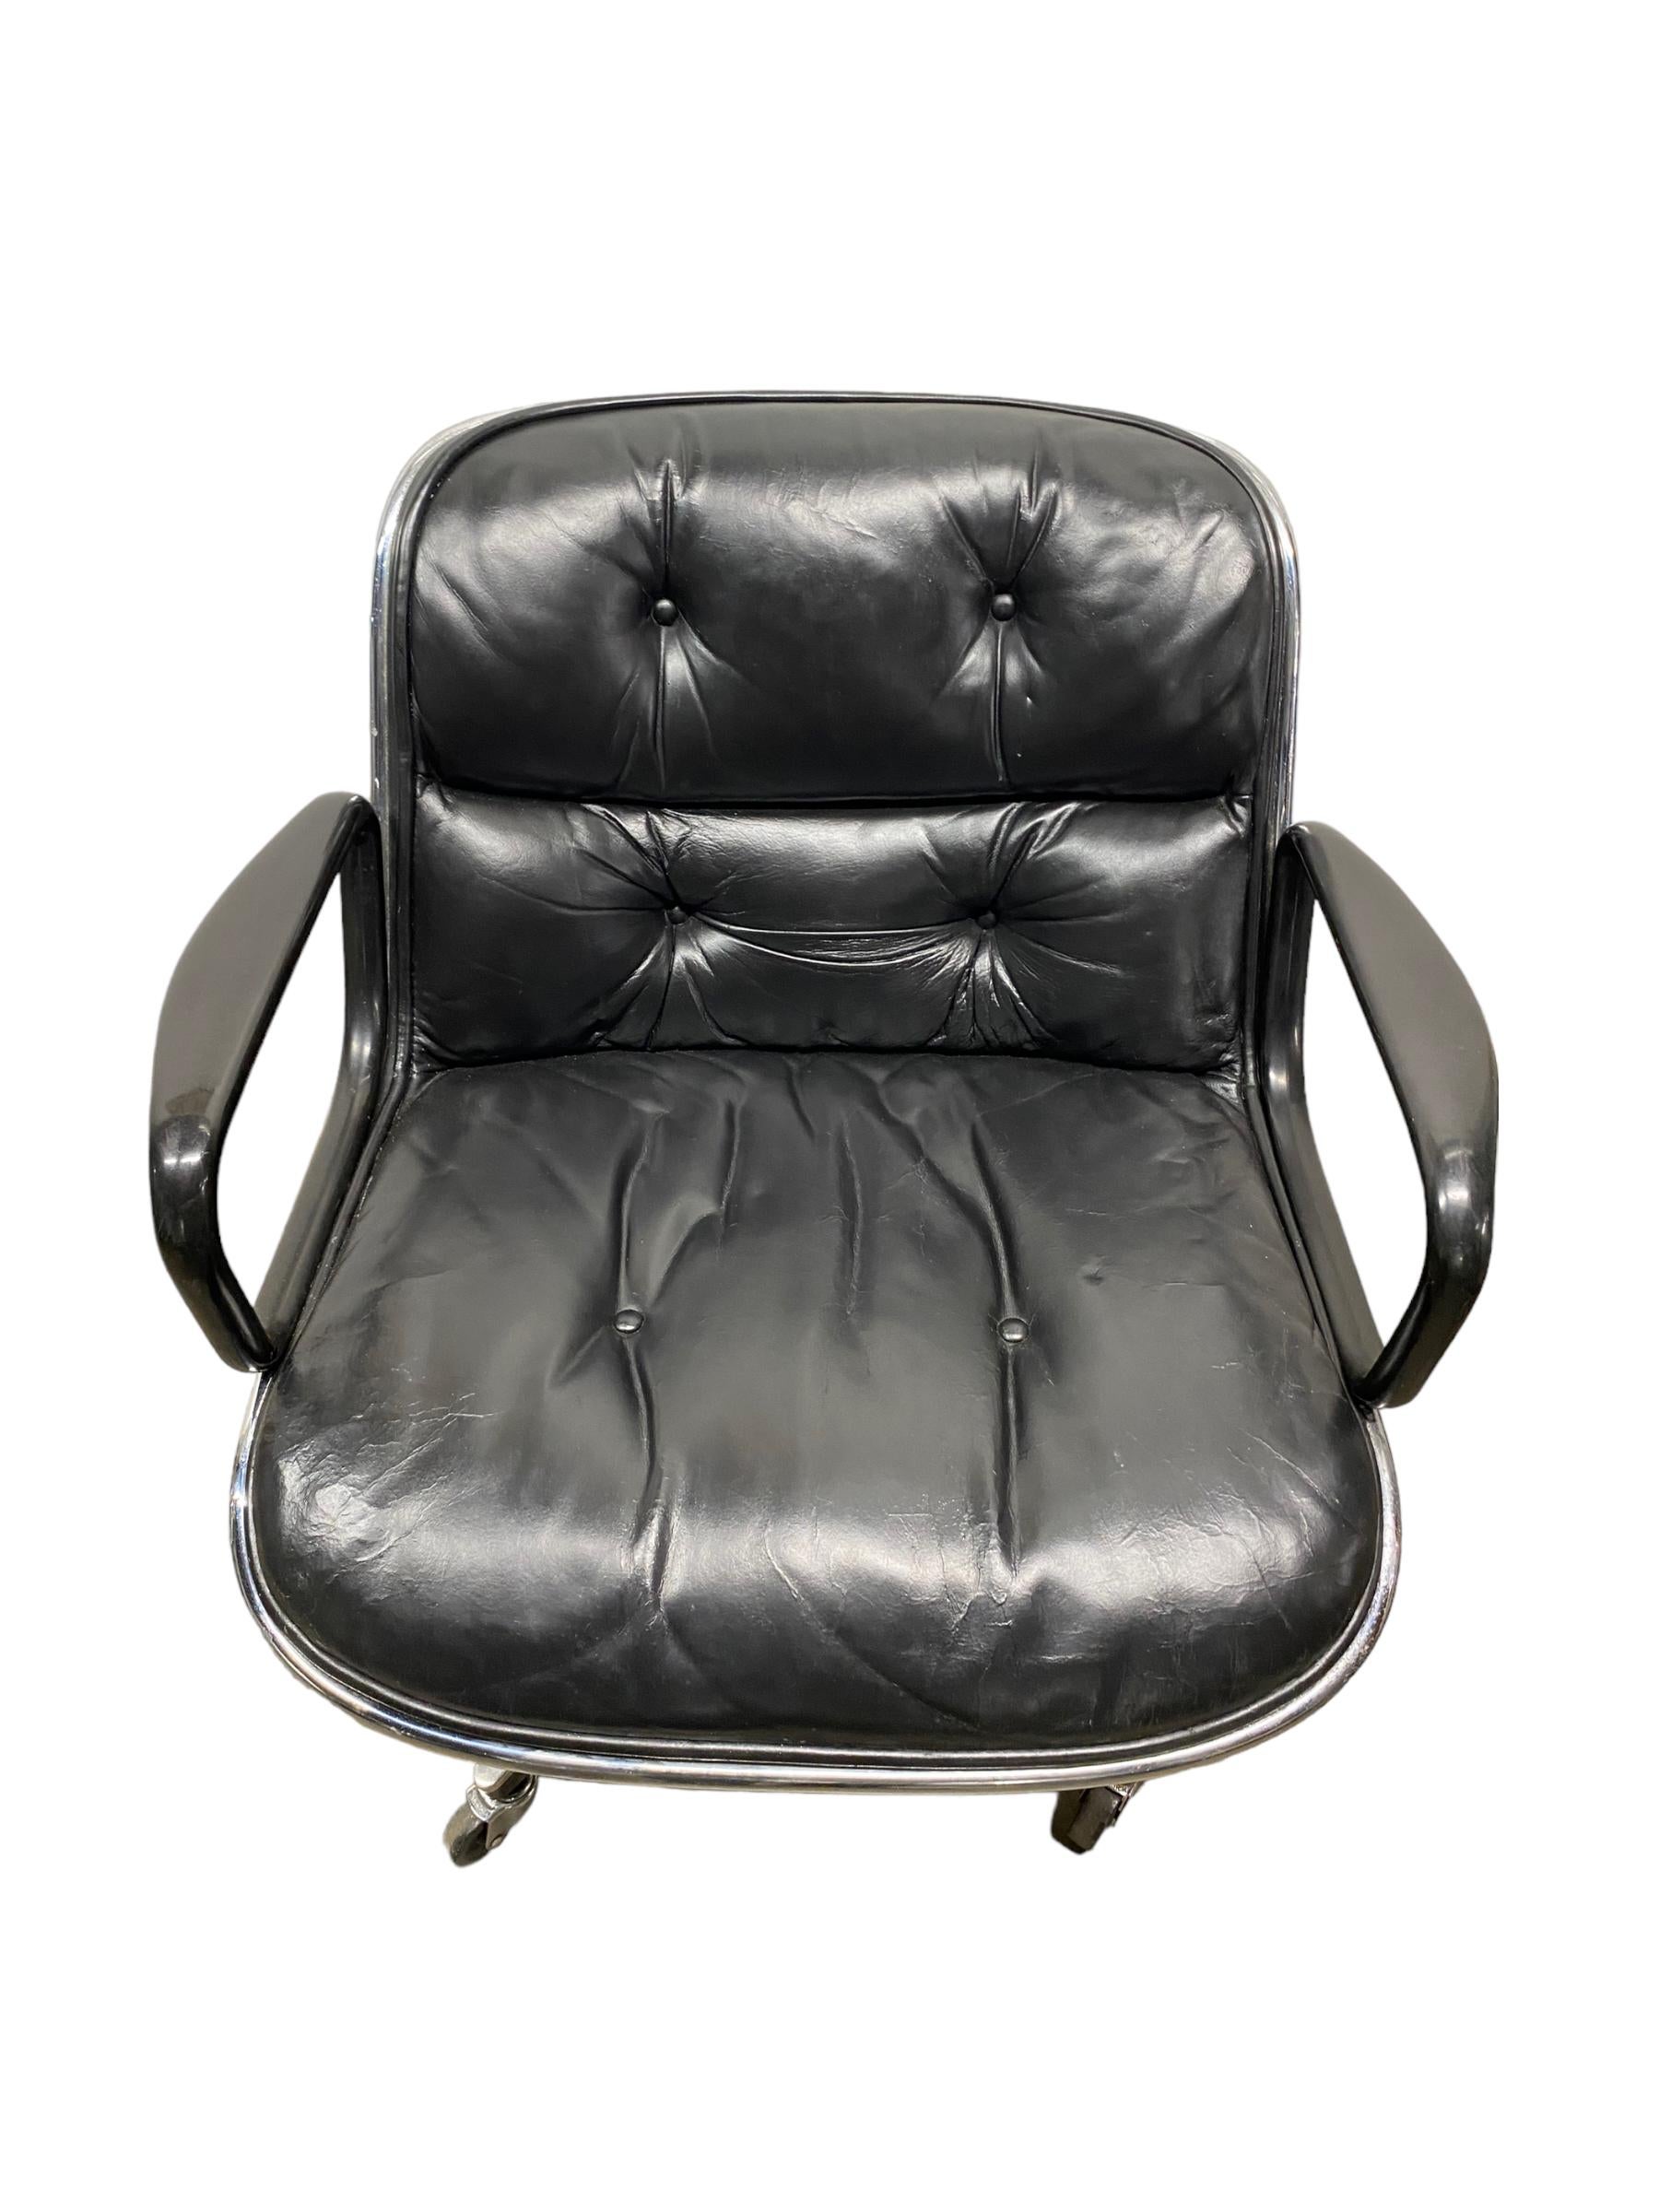 American Charles Pollock Executive Chair in Black Leather For Sale